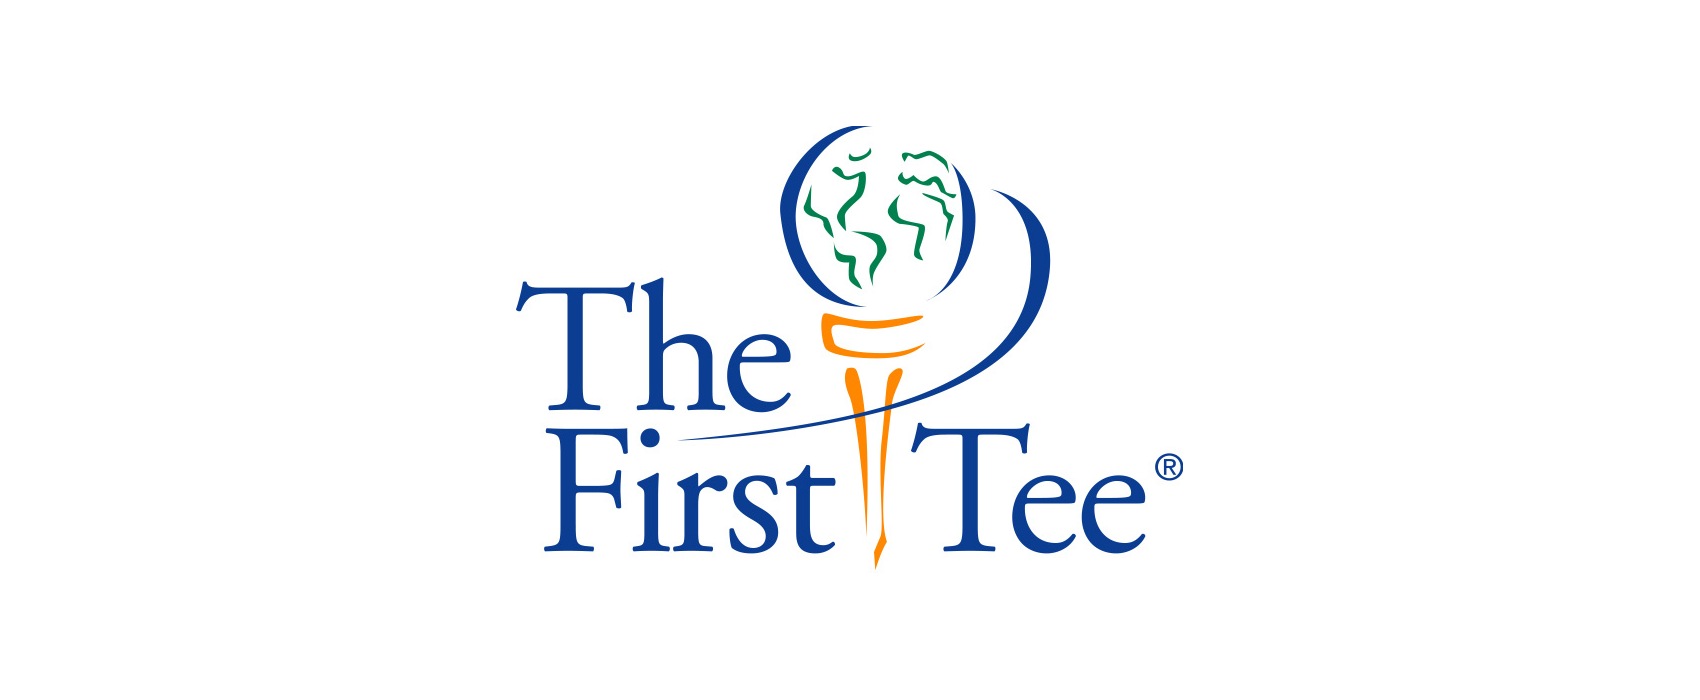 “The First Tee” Grows the Game